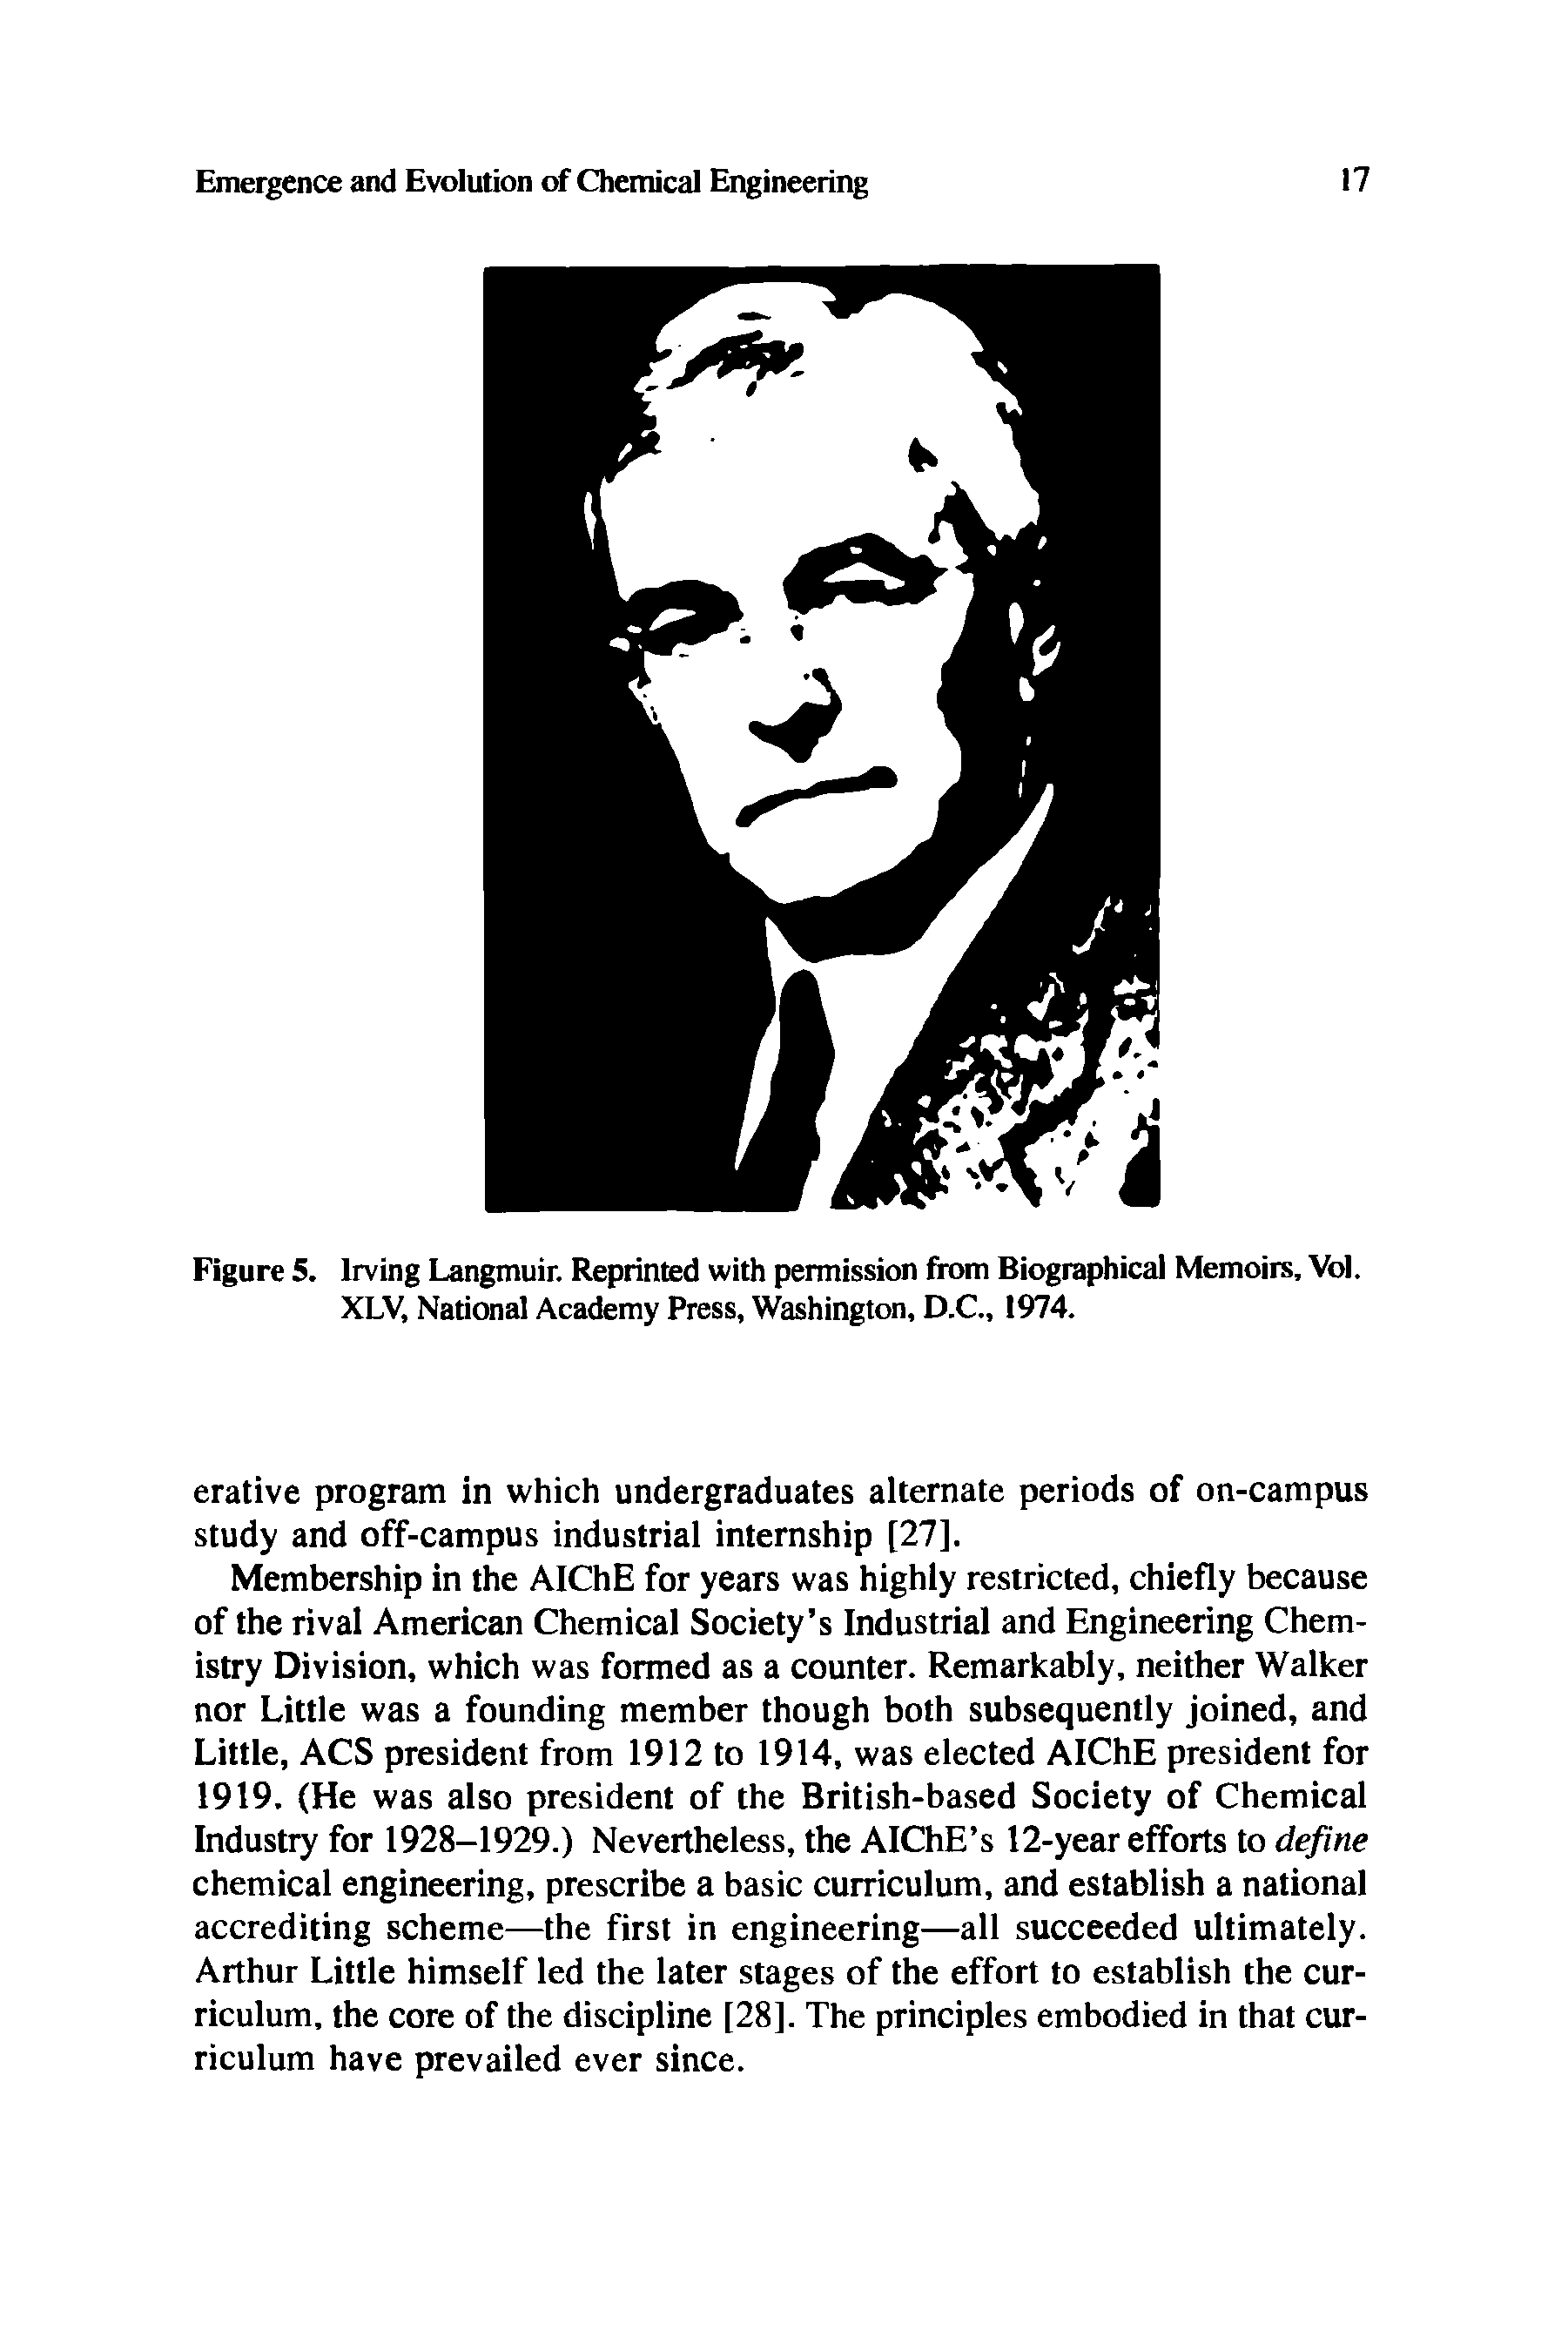 Figure 5. Irving Langmuir. Reprinted with permission from Biographical Memoirs, Vol. XLV, National Academy Press, Washington, D.C., 1974.